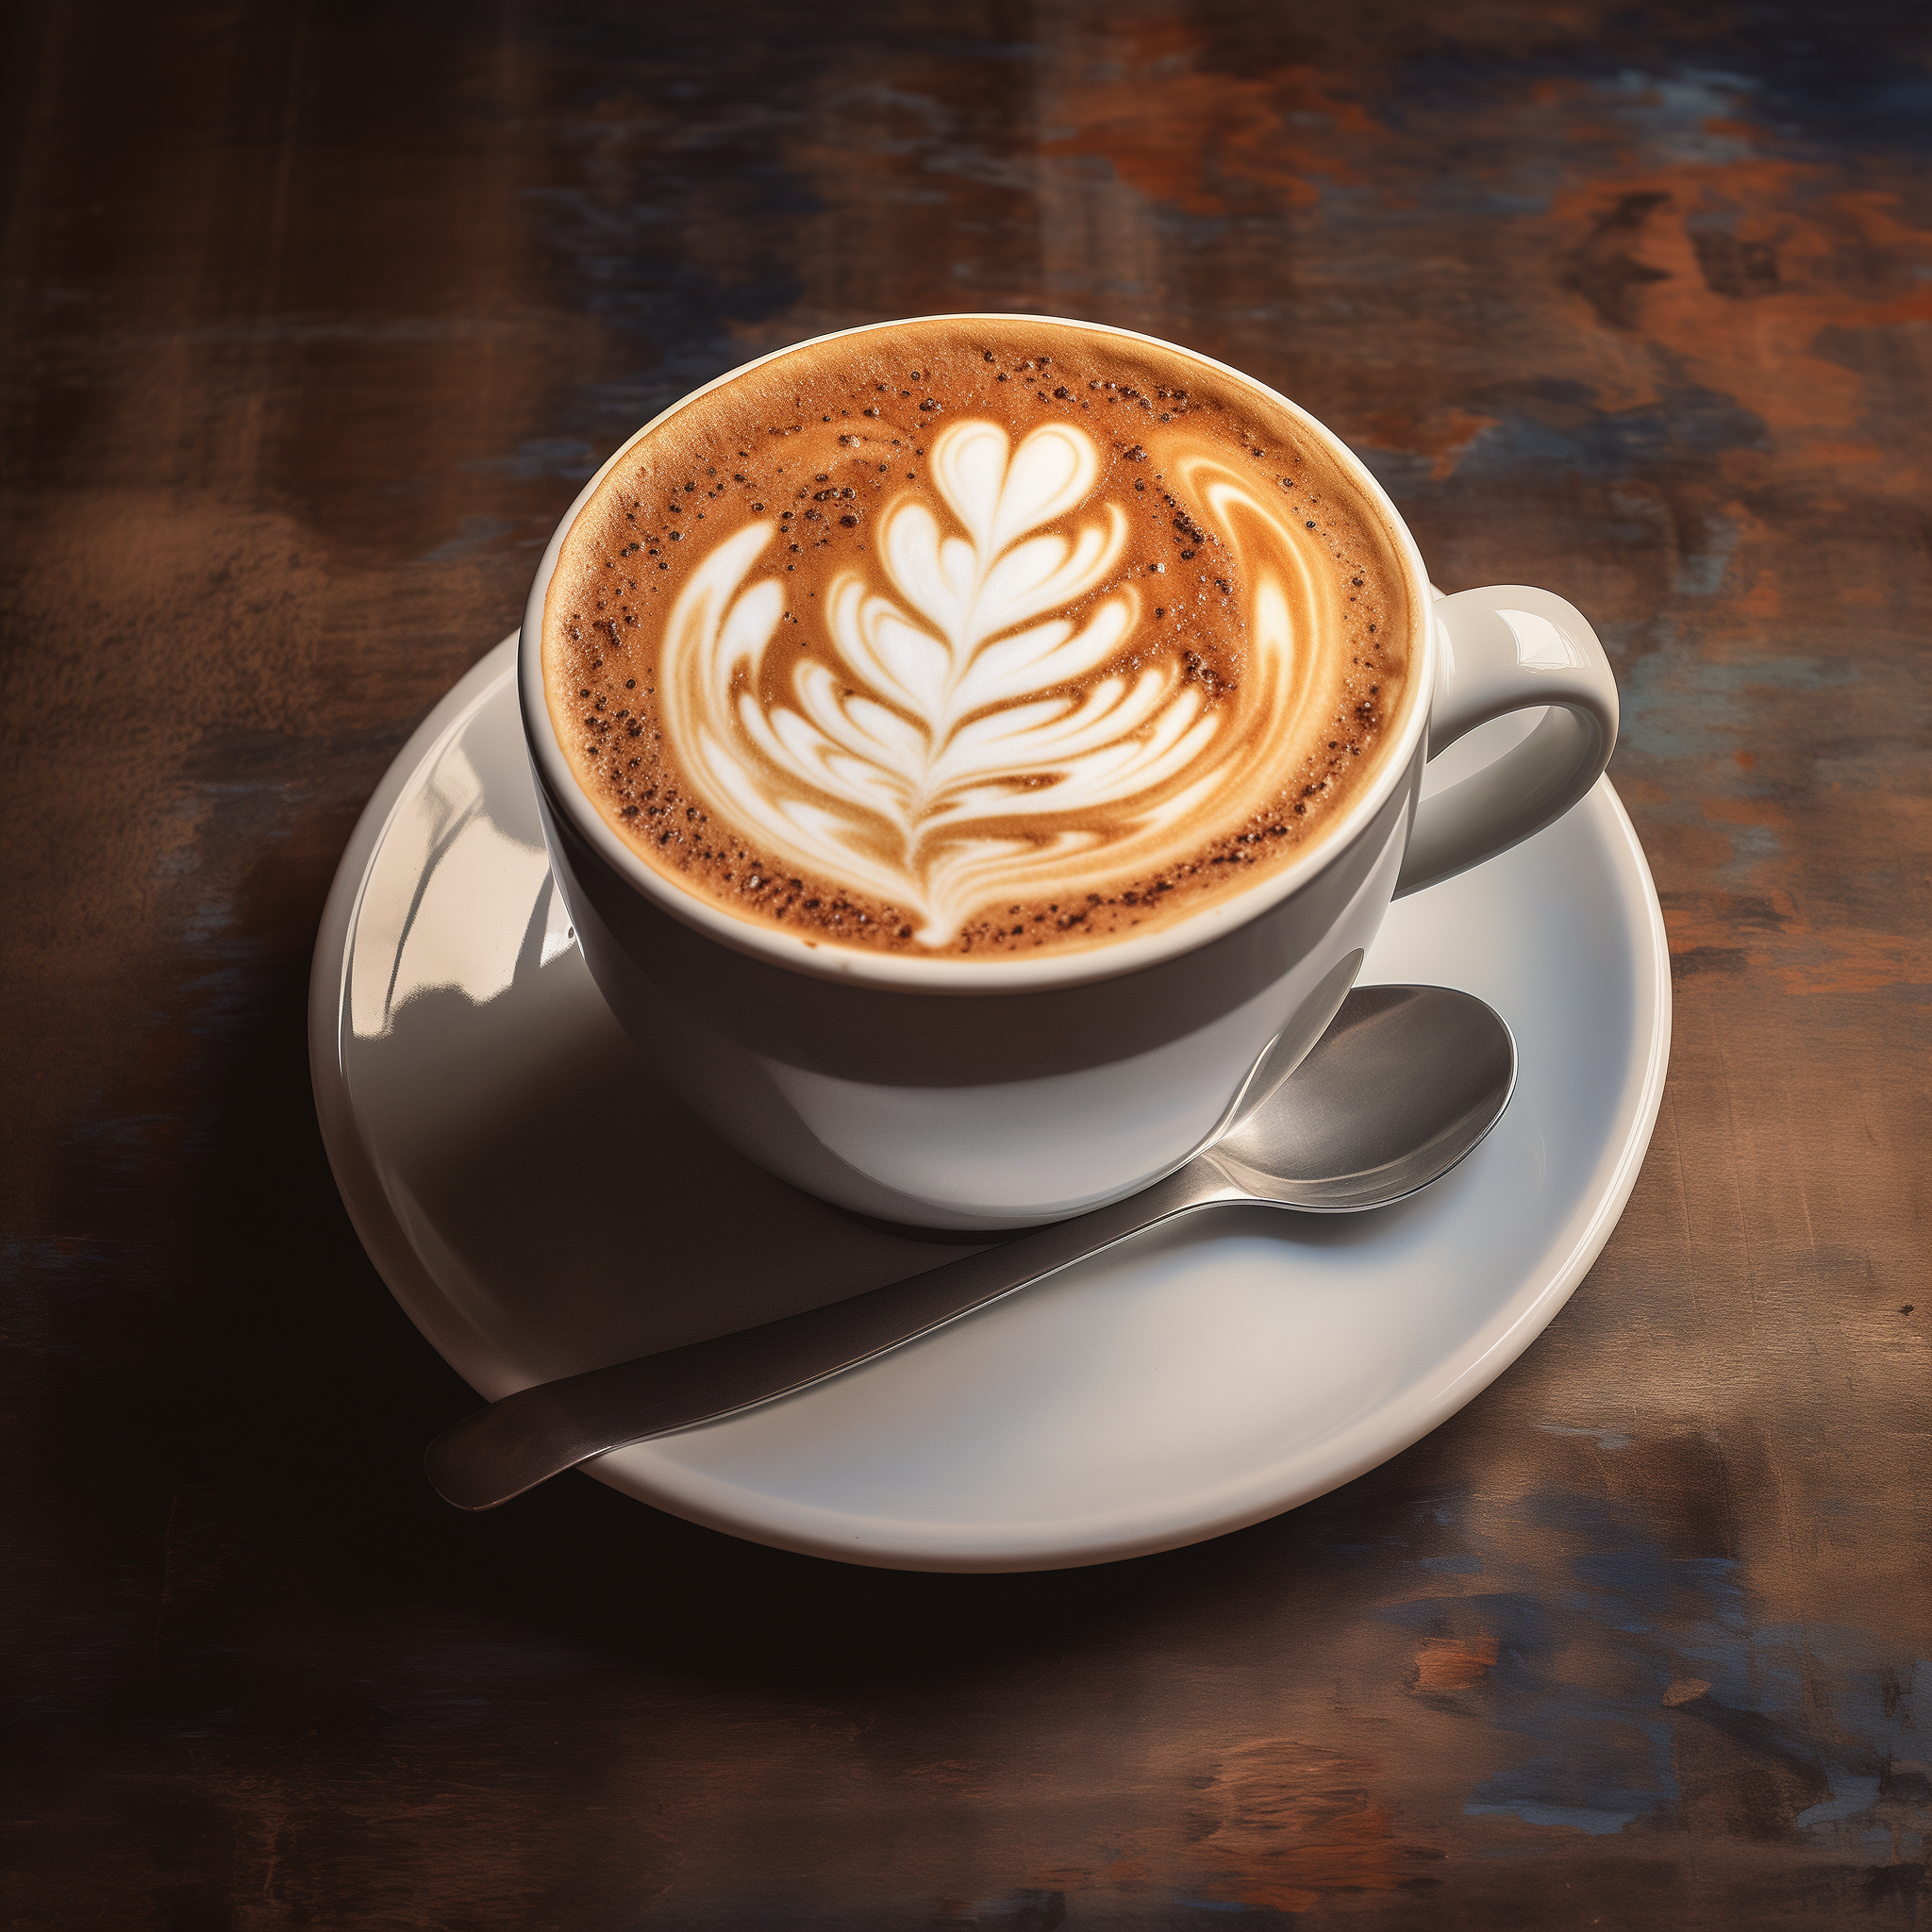 Aesthetic latte art on a freshly brewed cup of coffee, perfect for a coffee lover's avatar or profile picture.